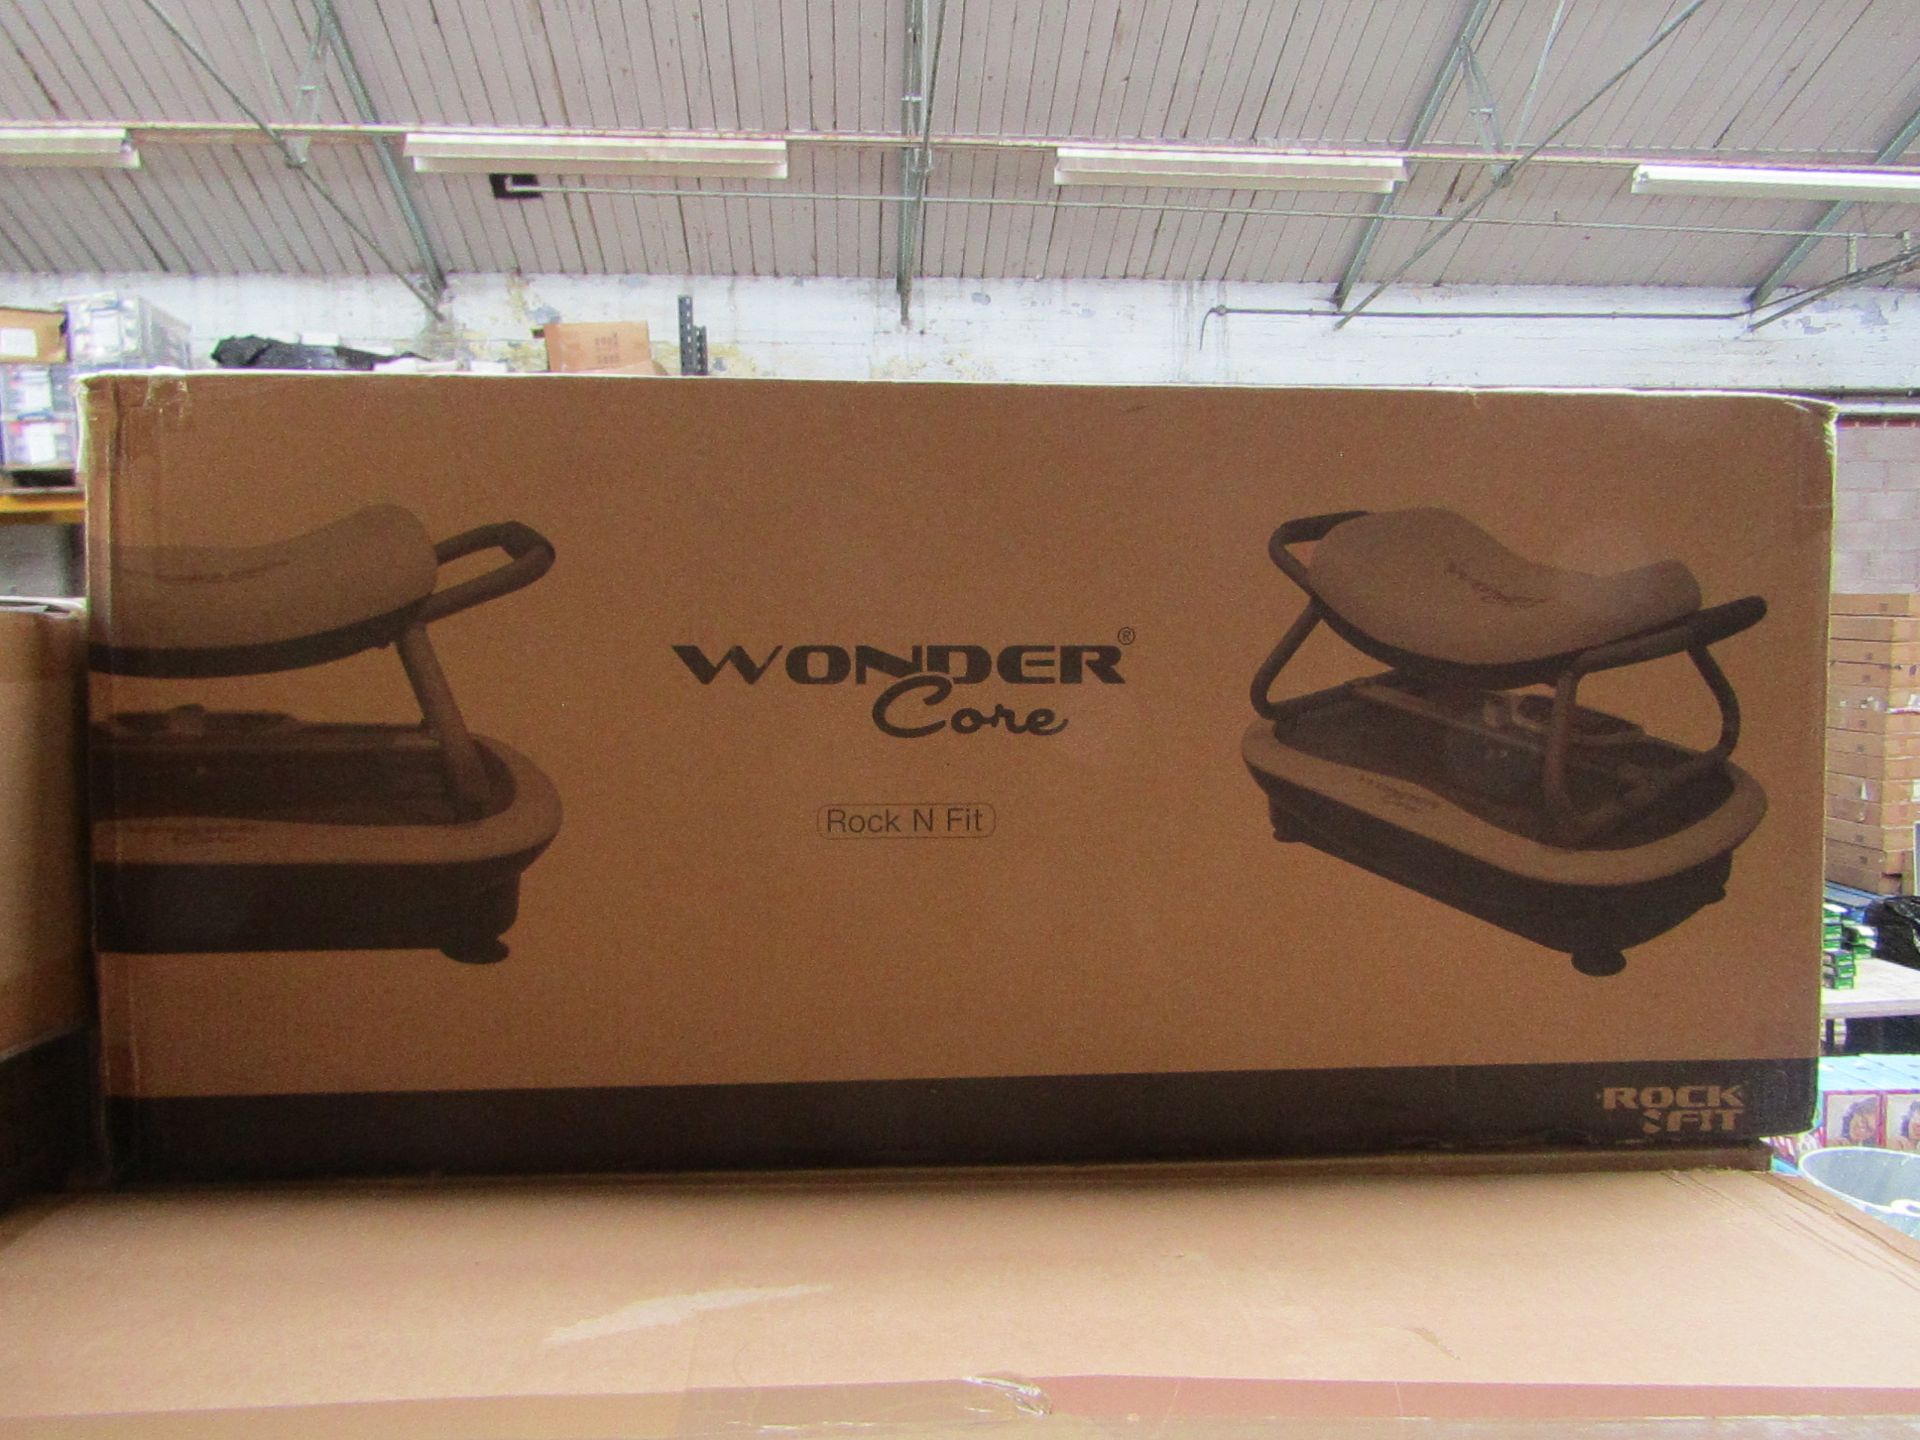 | 1X | WONDER CORE ROCK N FIT | UNCHECKED AND BOXED | NO ONLINE RE-SALE | SKU C5060541516618 |